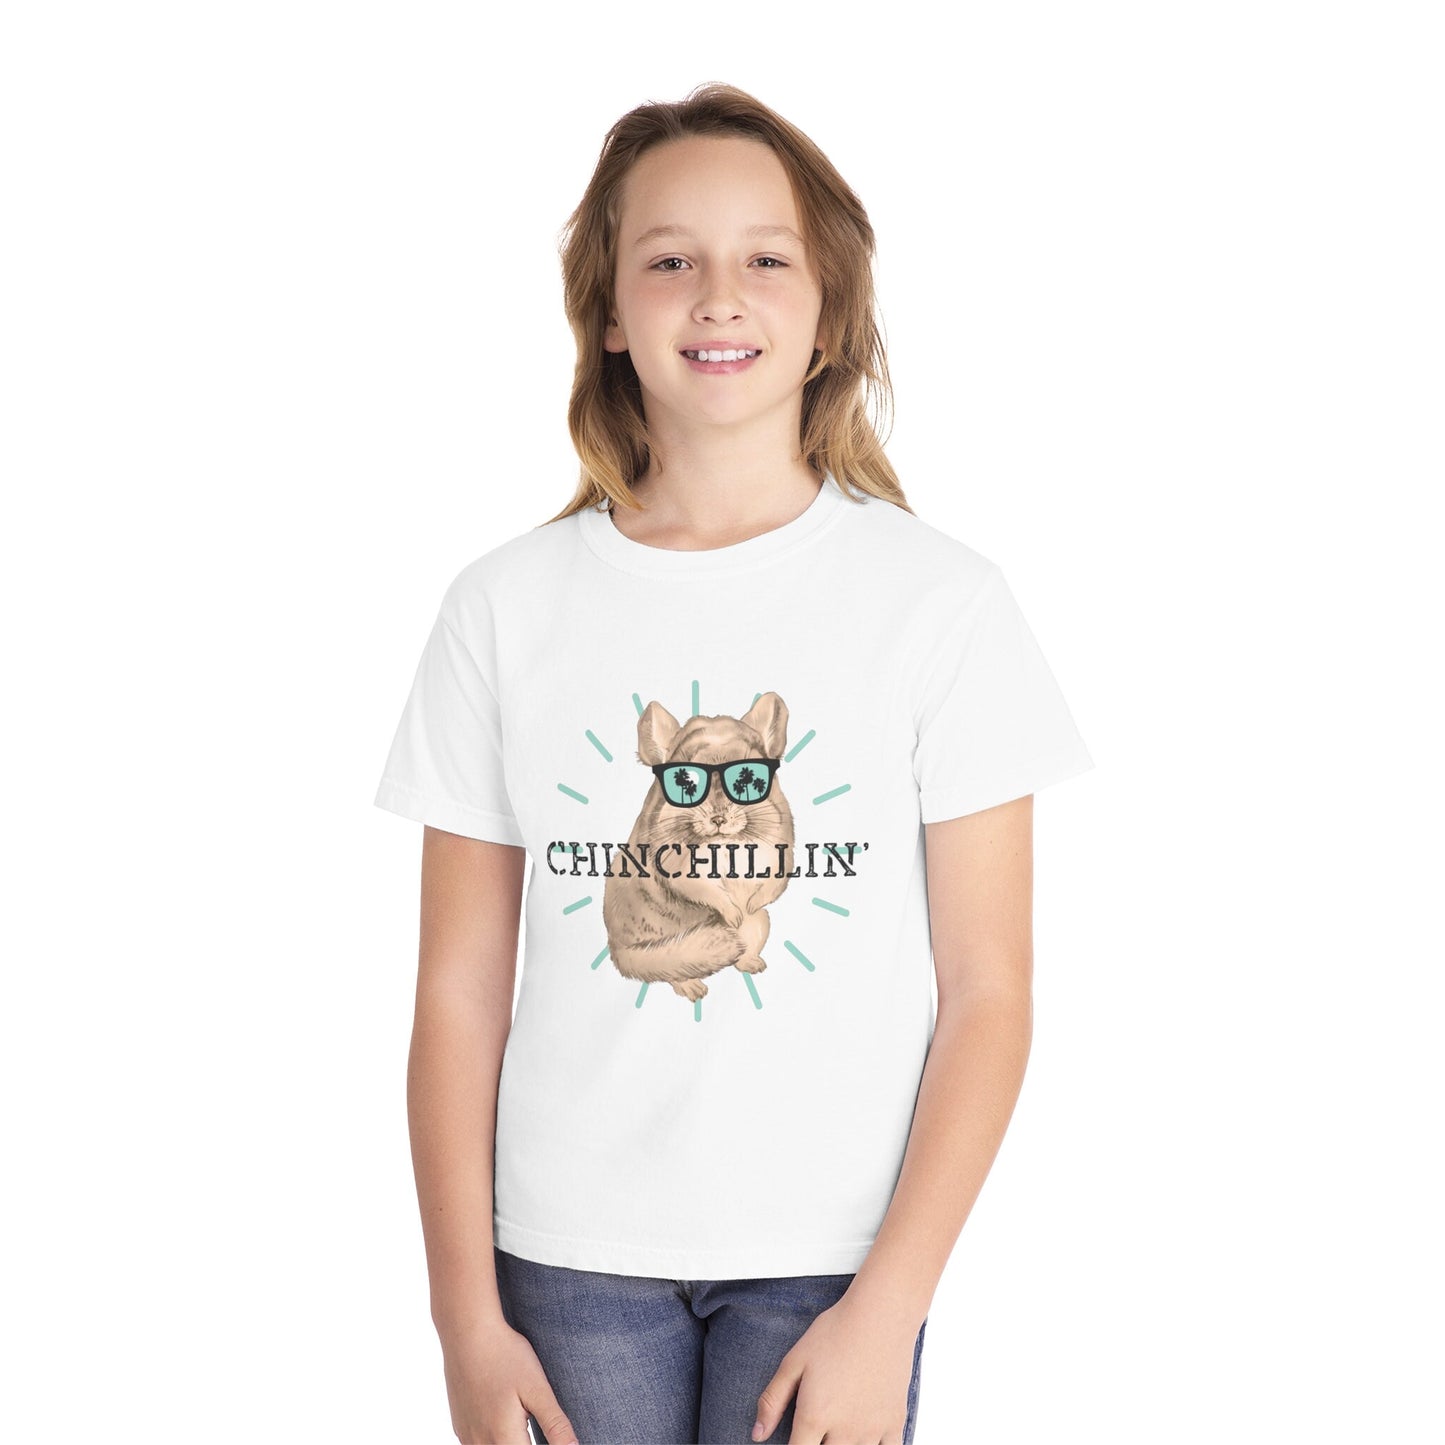 Kids Tan Chinchillin Tee, Cute Chinchilla Shirt, Tshirt For Chinchilla Owner, Gift for Chin Lover, Unique Pets, Animals In Glasses